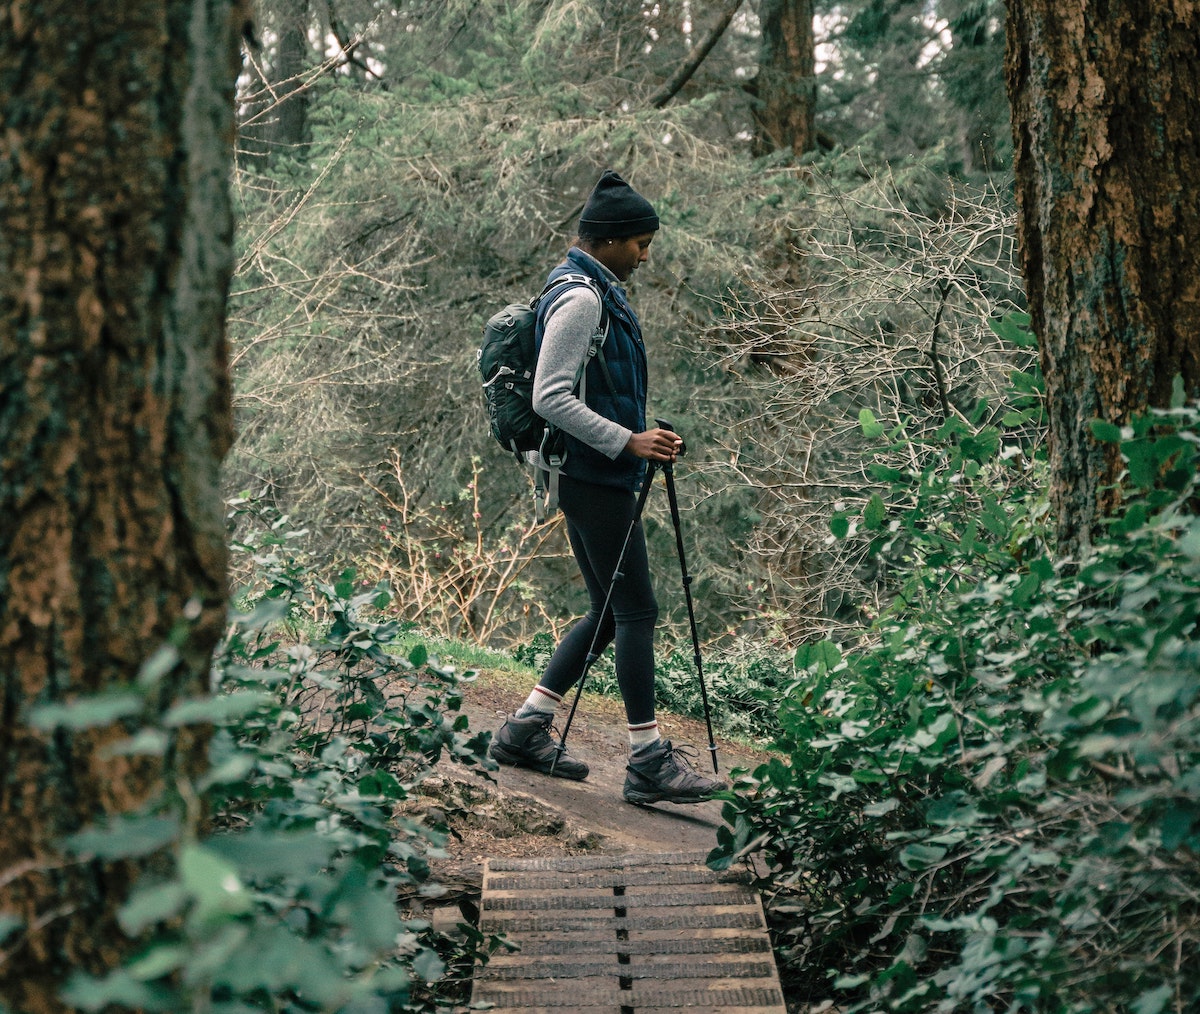 A woman of color hiking along a trail in the Pacific Northwest. She is surrounded by tall trees and lush vegetation.